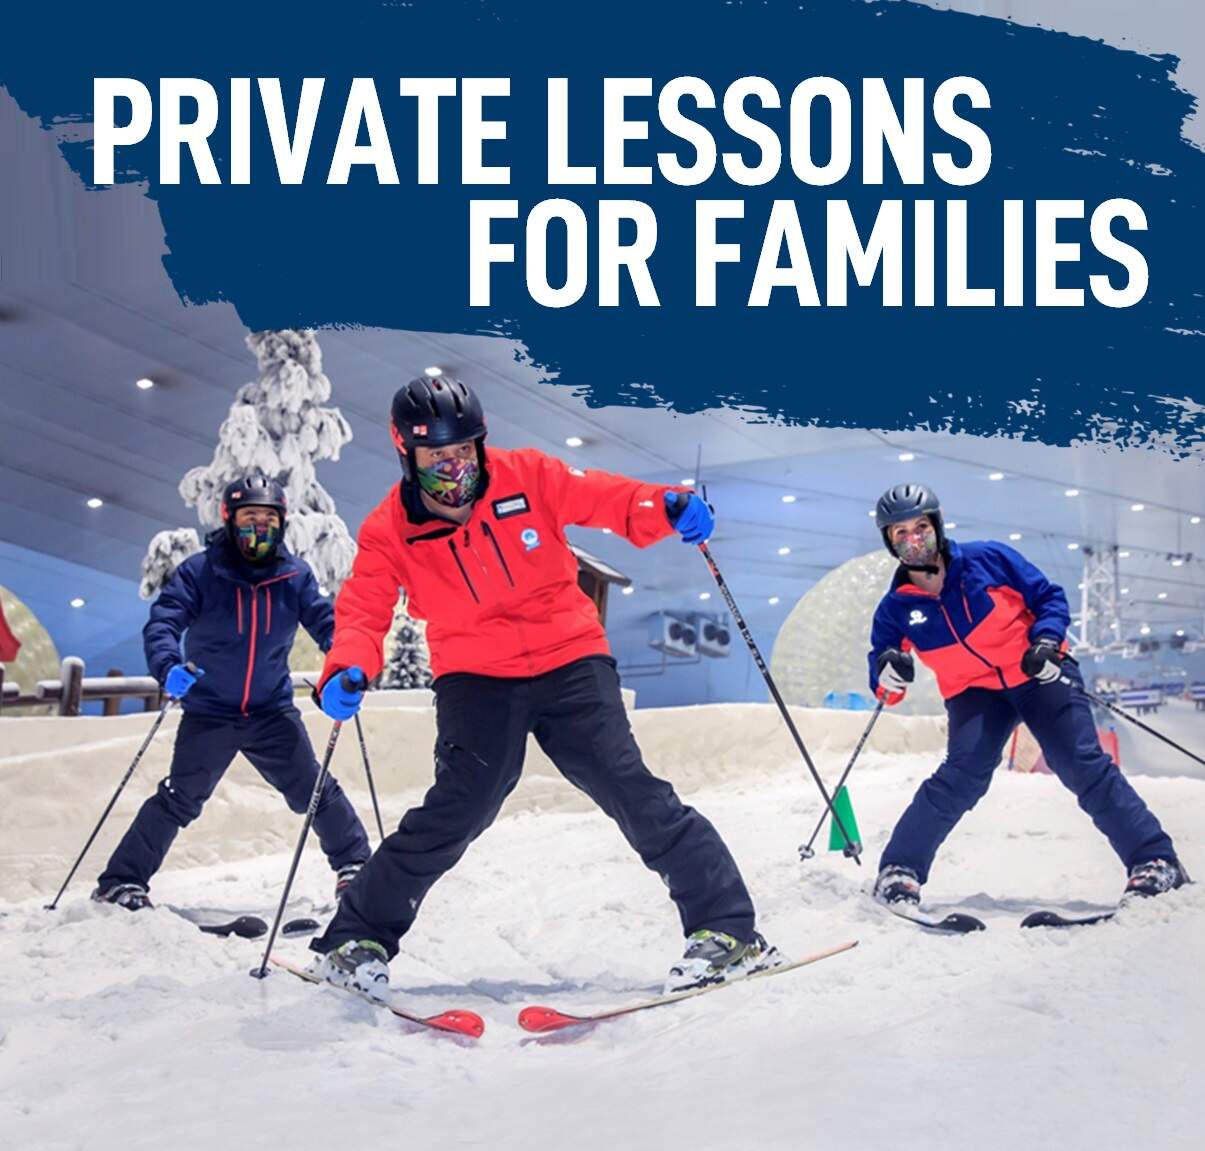 PRIVATE SKI AND SNOWBOARDING LESSONS FOR FAMILIES